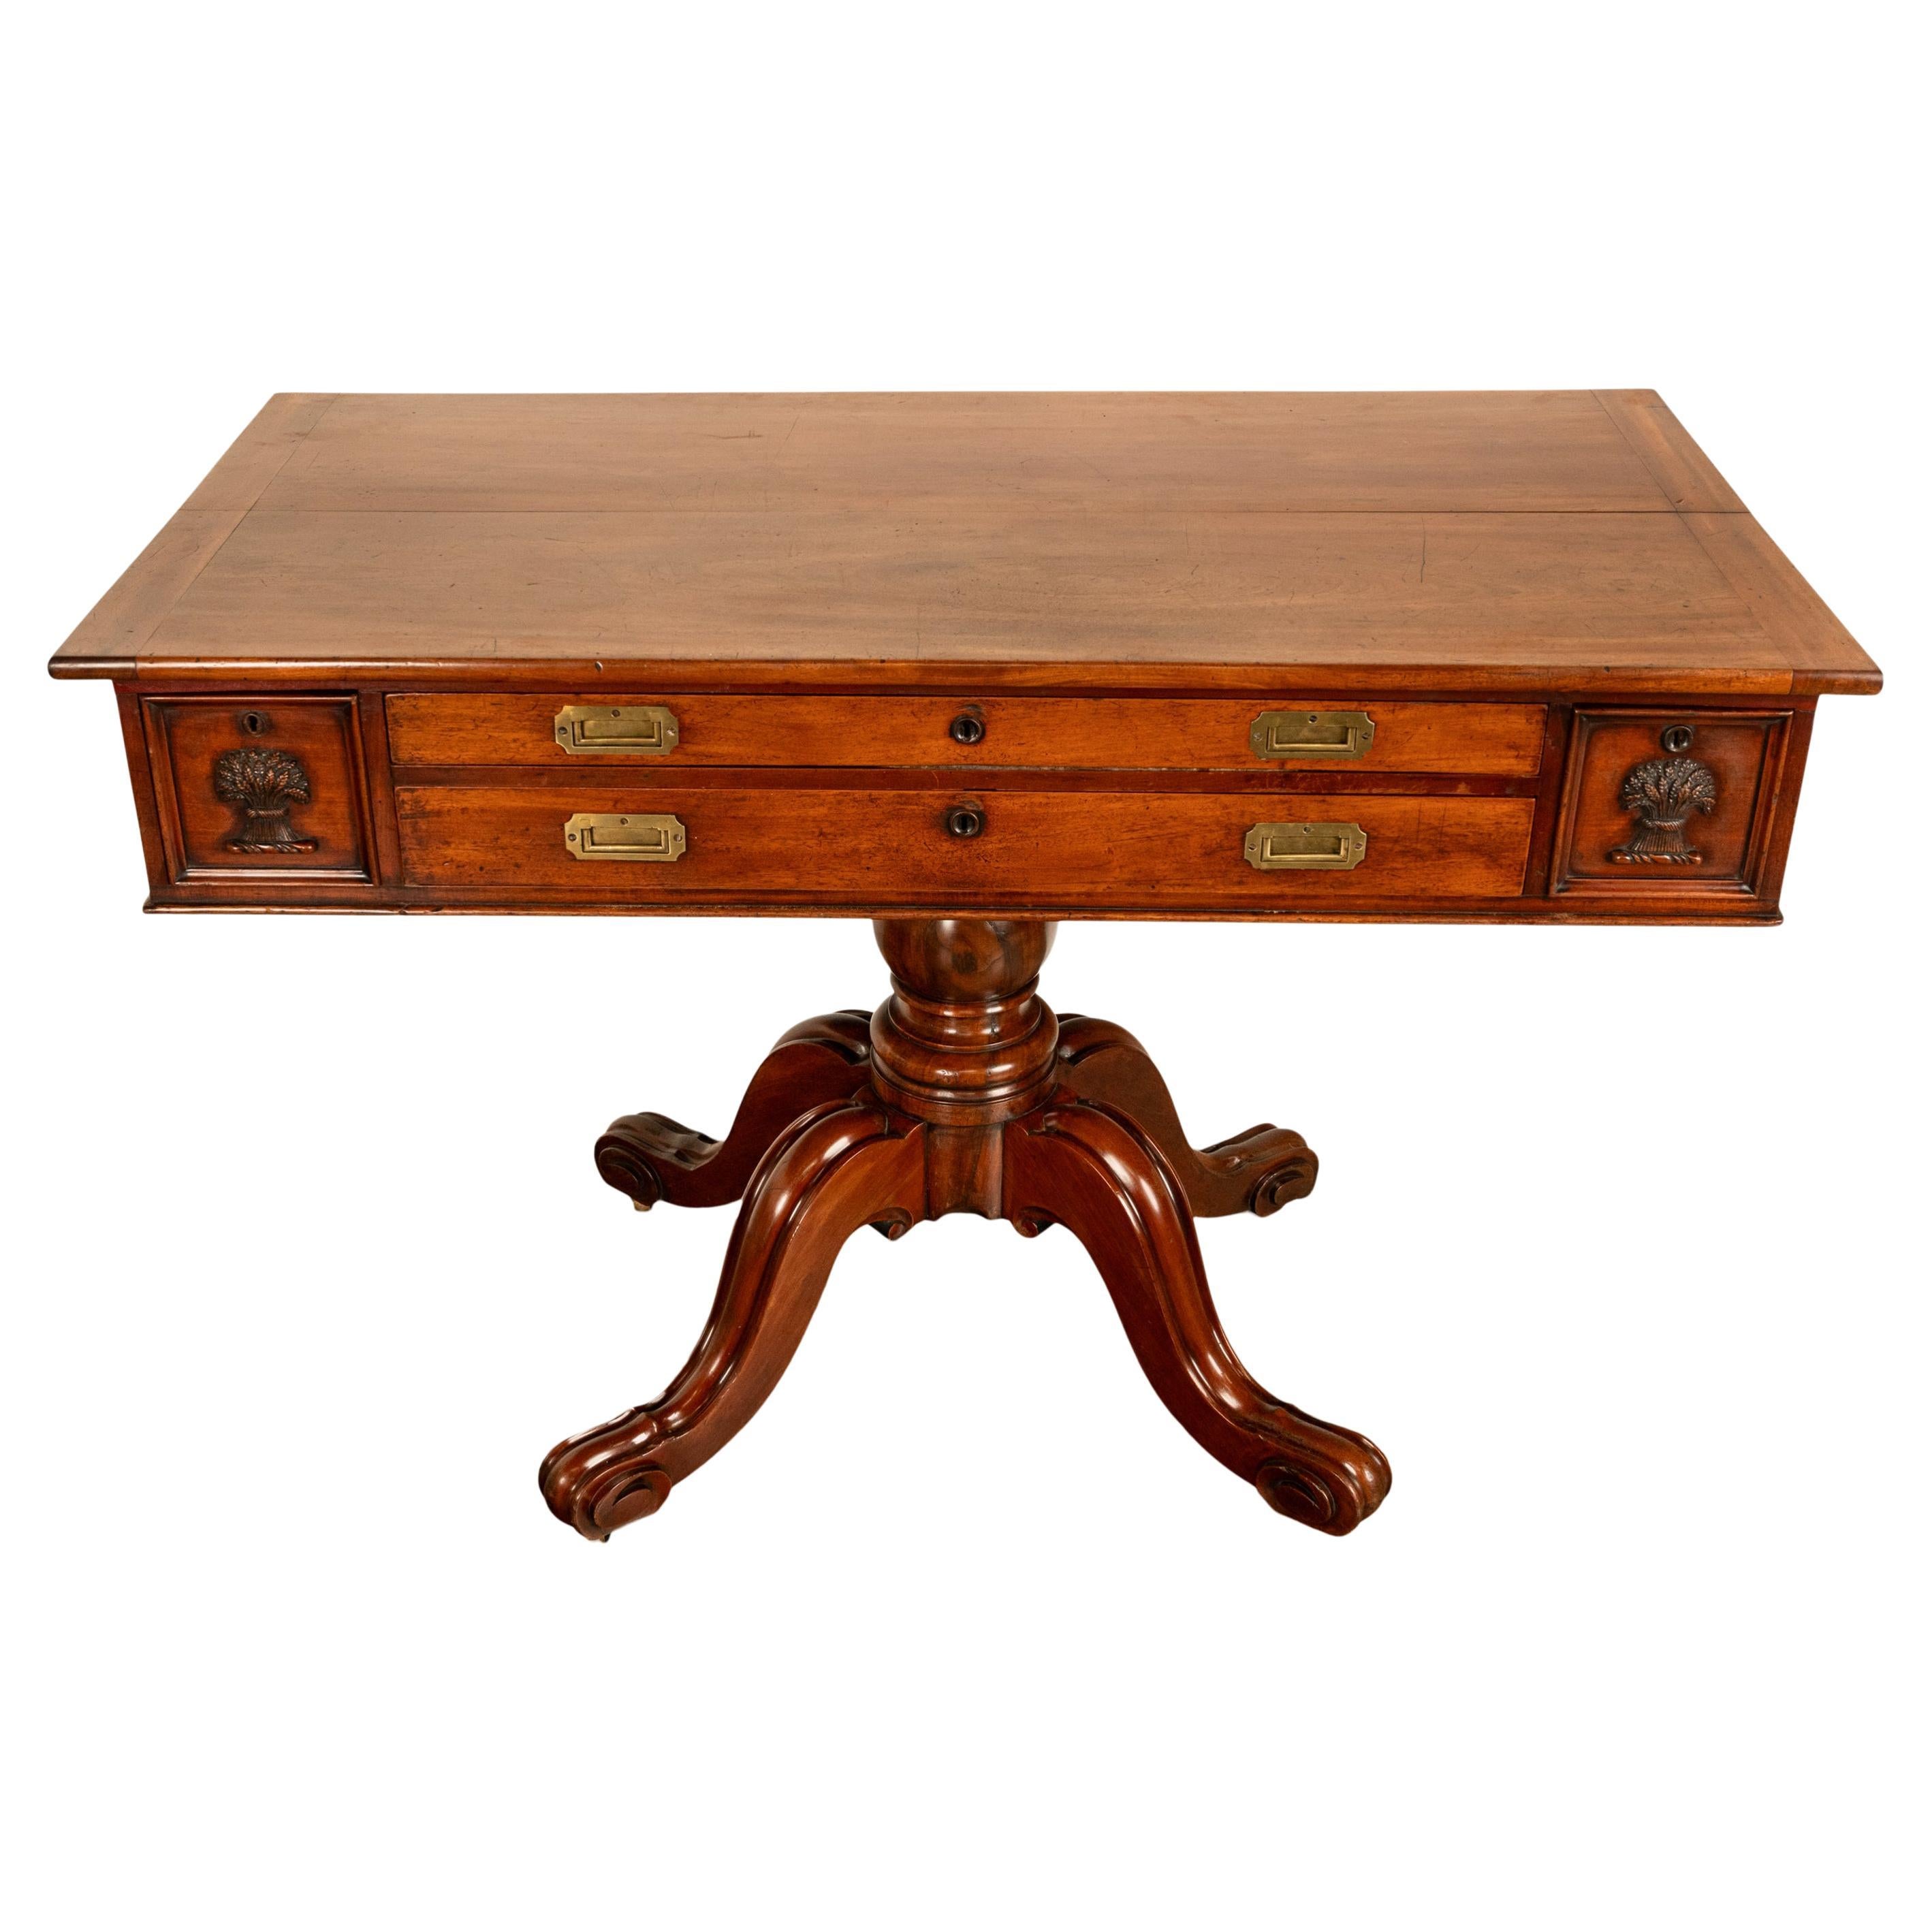 A good and unusual 19th century antique mahogany pedestal architect's drafting table, desk, circa 1870.
The desk/drafting table having a hinged lift up writing/drawing surface that can be elevated or flat. To the front are two wide & deep file